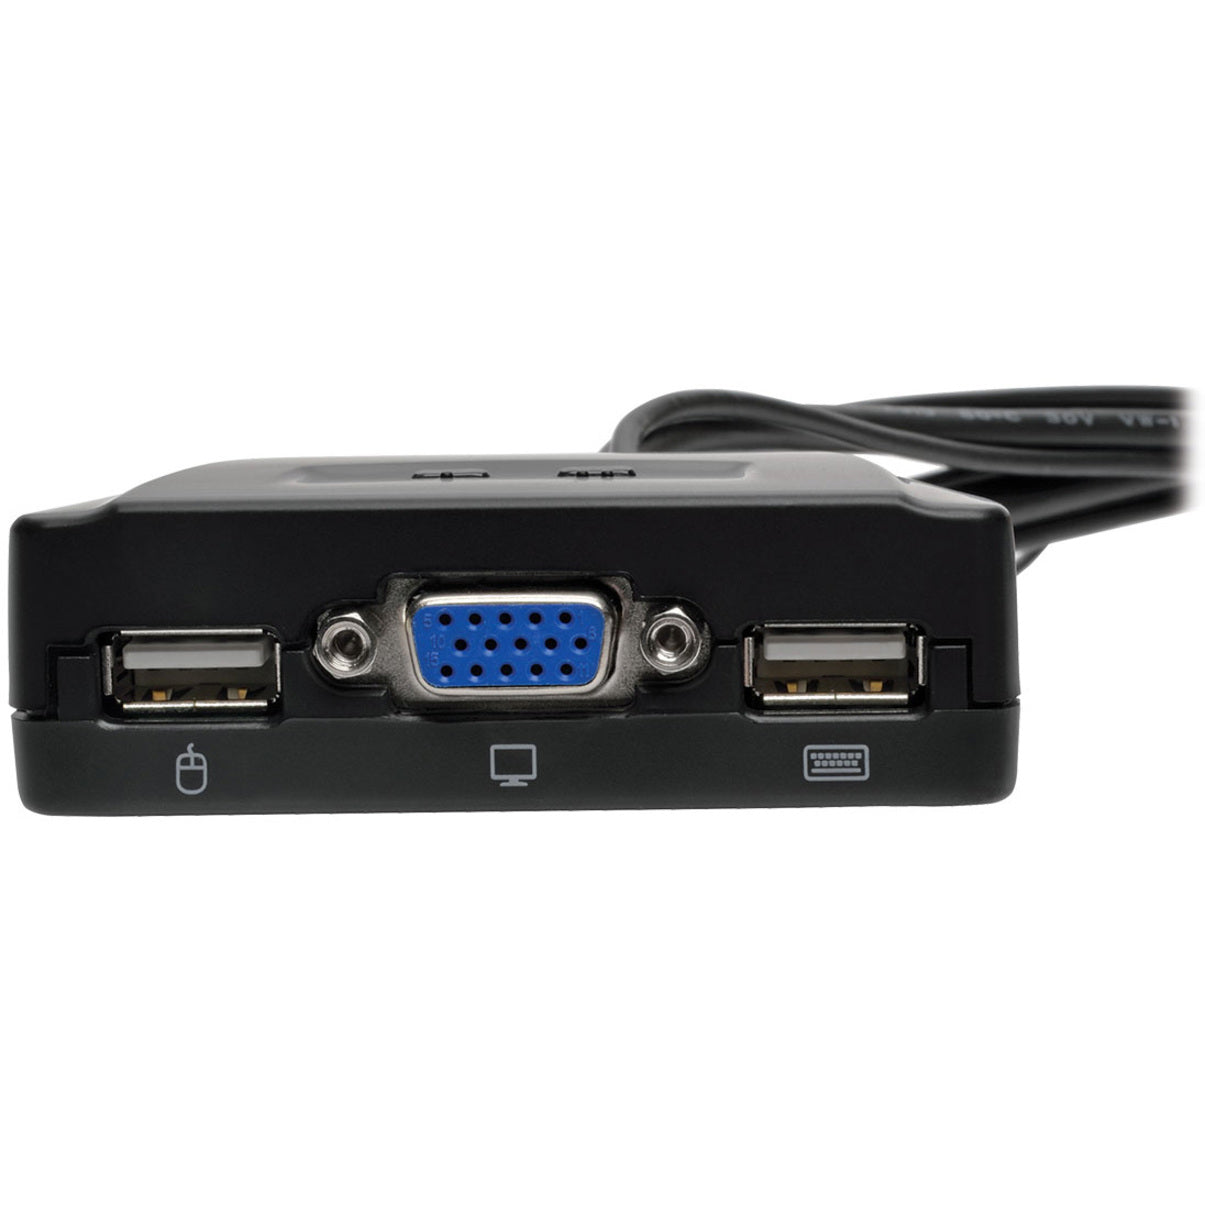 Tripp Lite B032-VU2 2-Port USB/VGA Cable KVM Switch with Cables and USB Peripheral Sharing, 2048 x 1536 Resolution, 3 Year Warranty